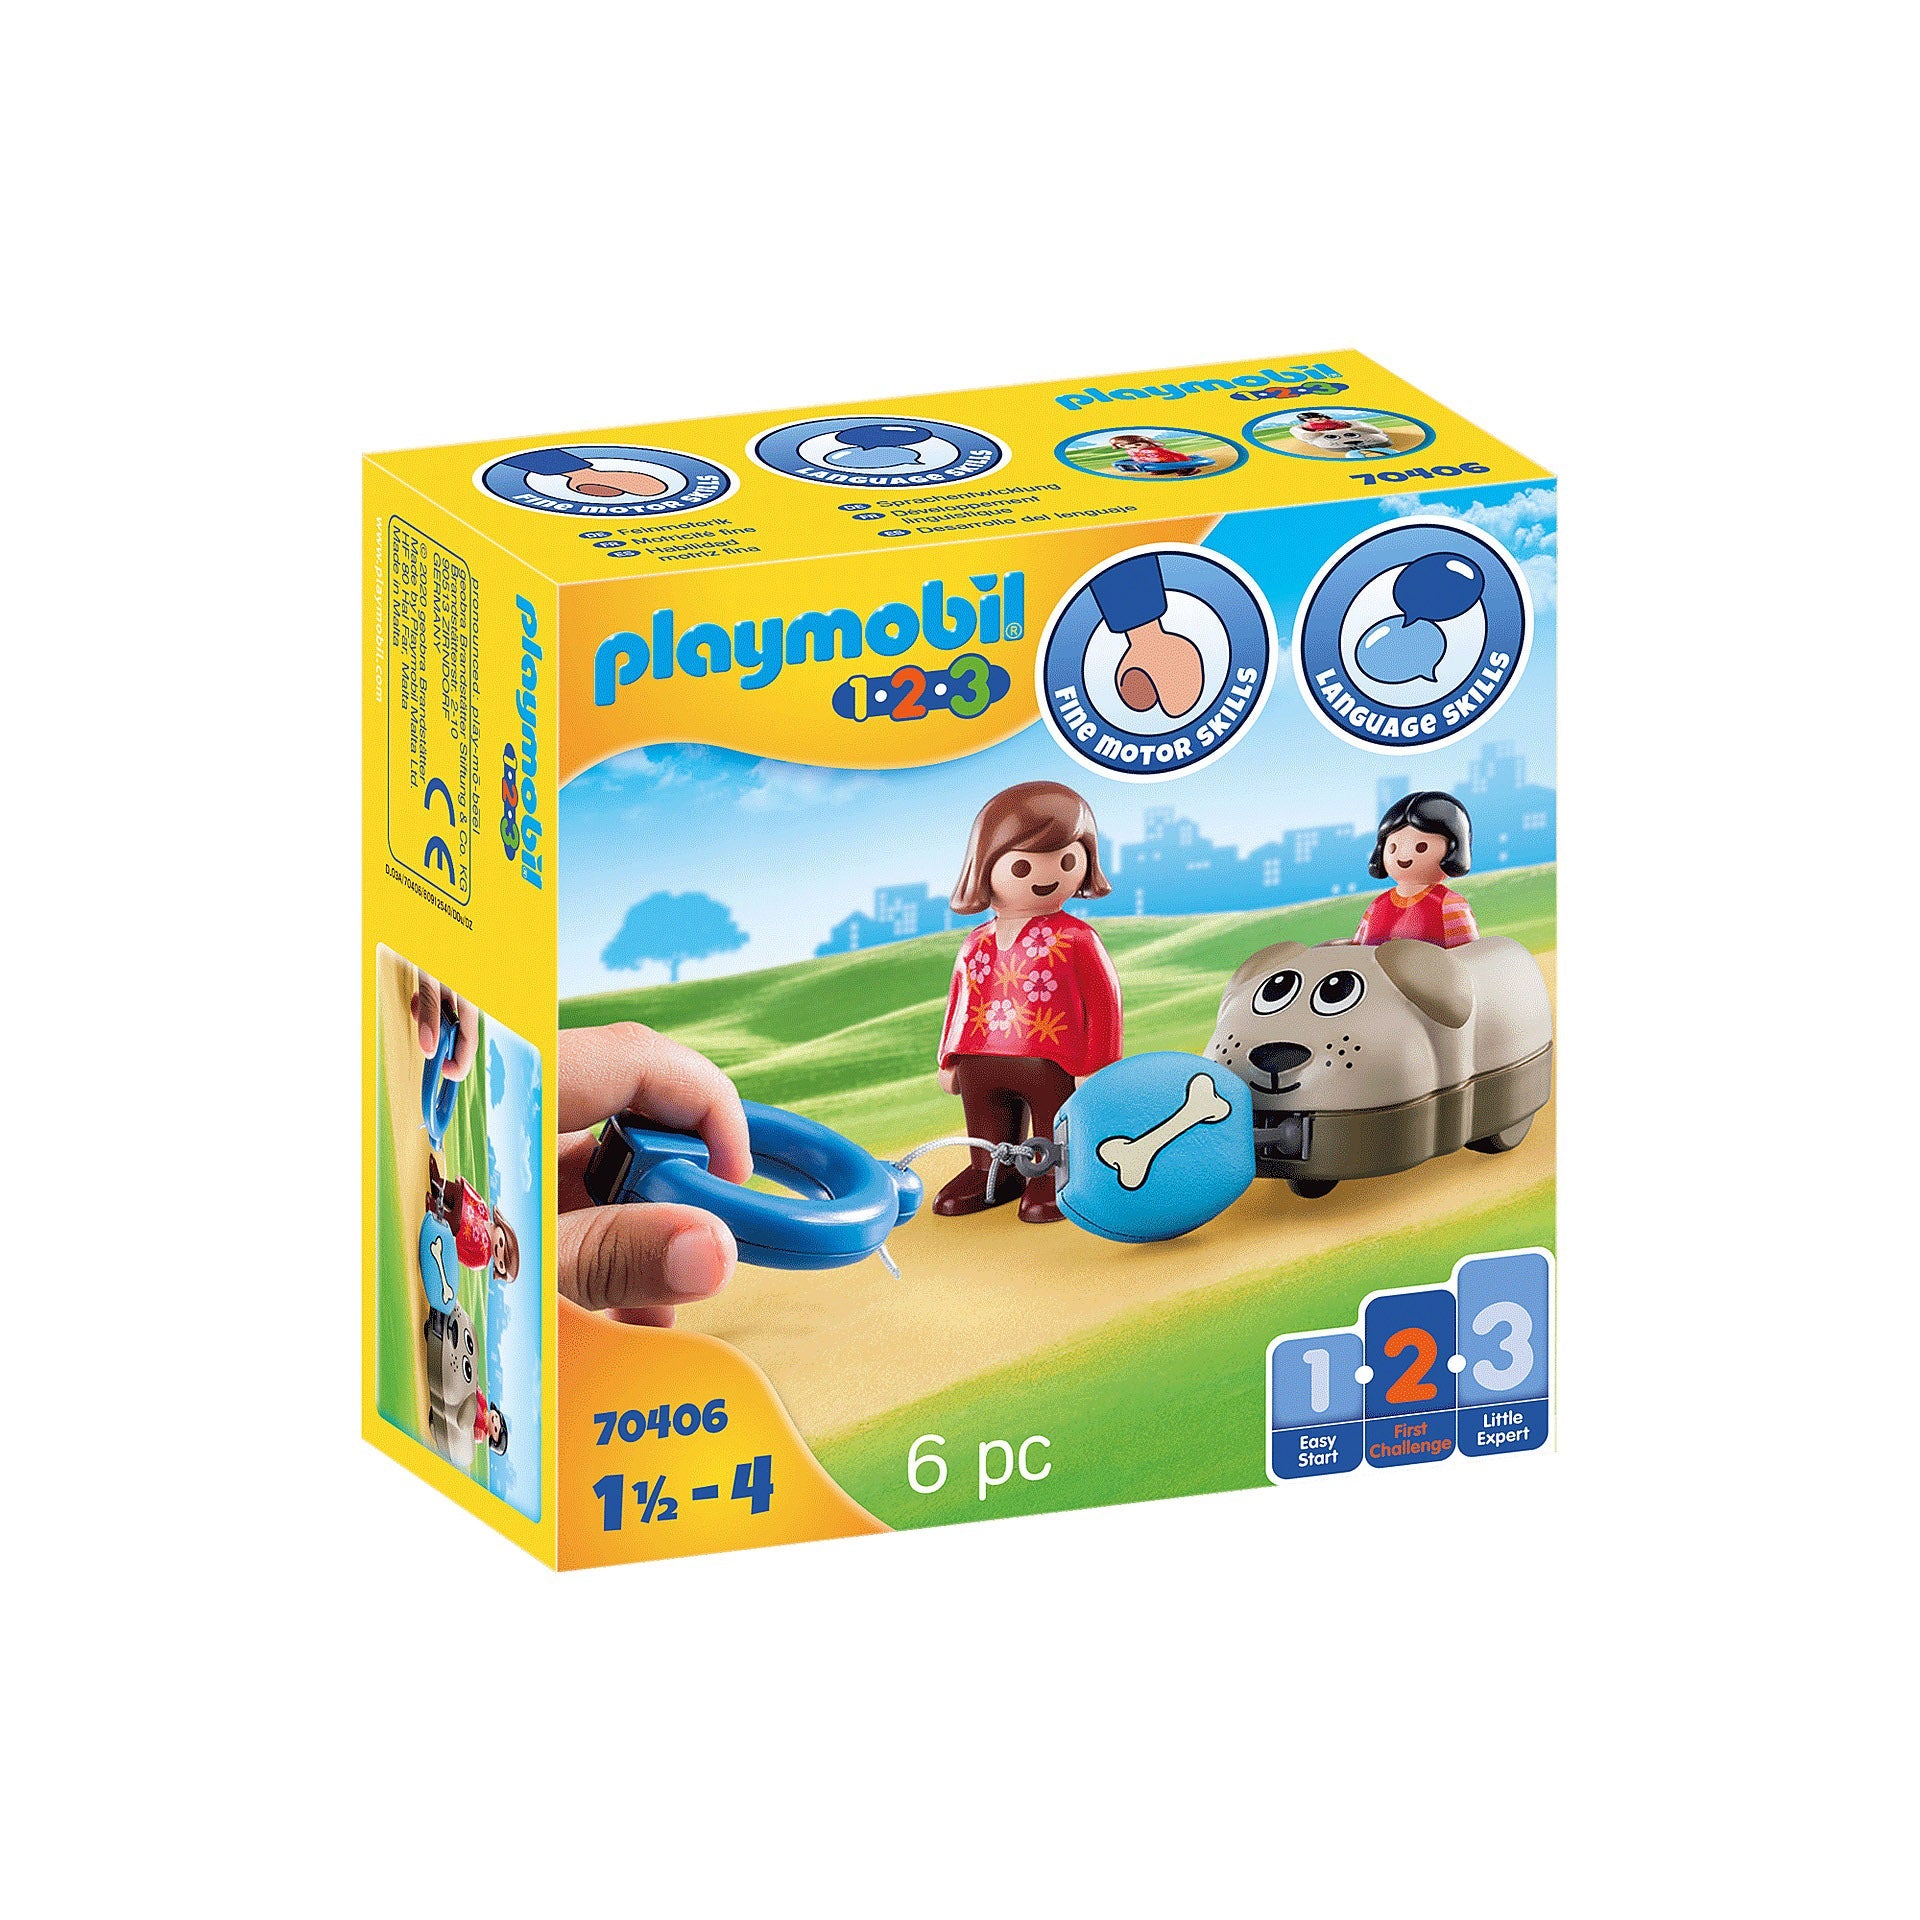  Playmobil Police Station Play Box : Toys & Games